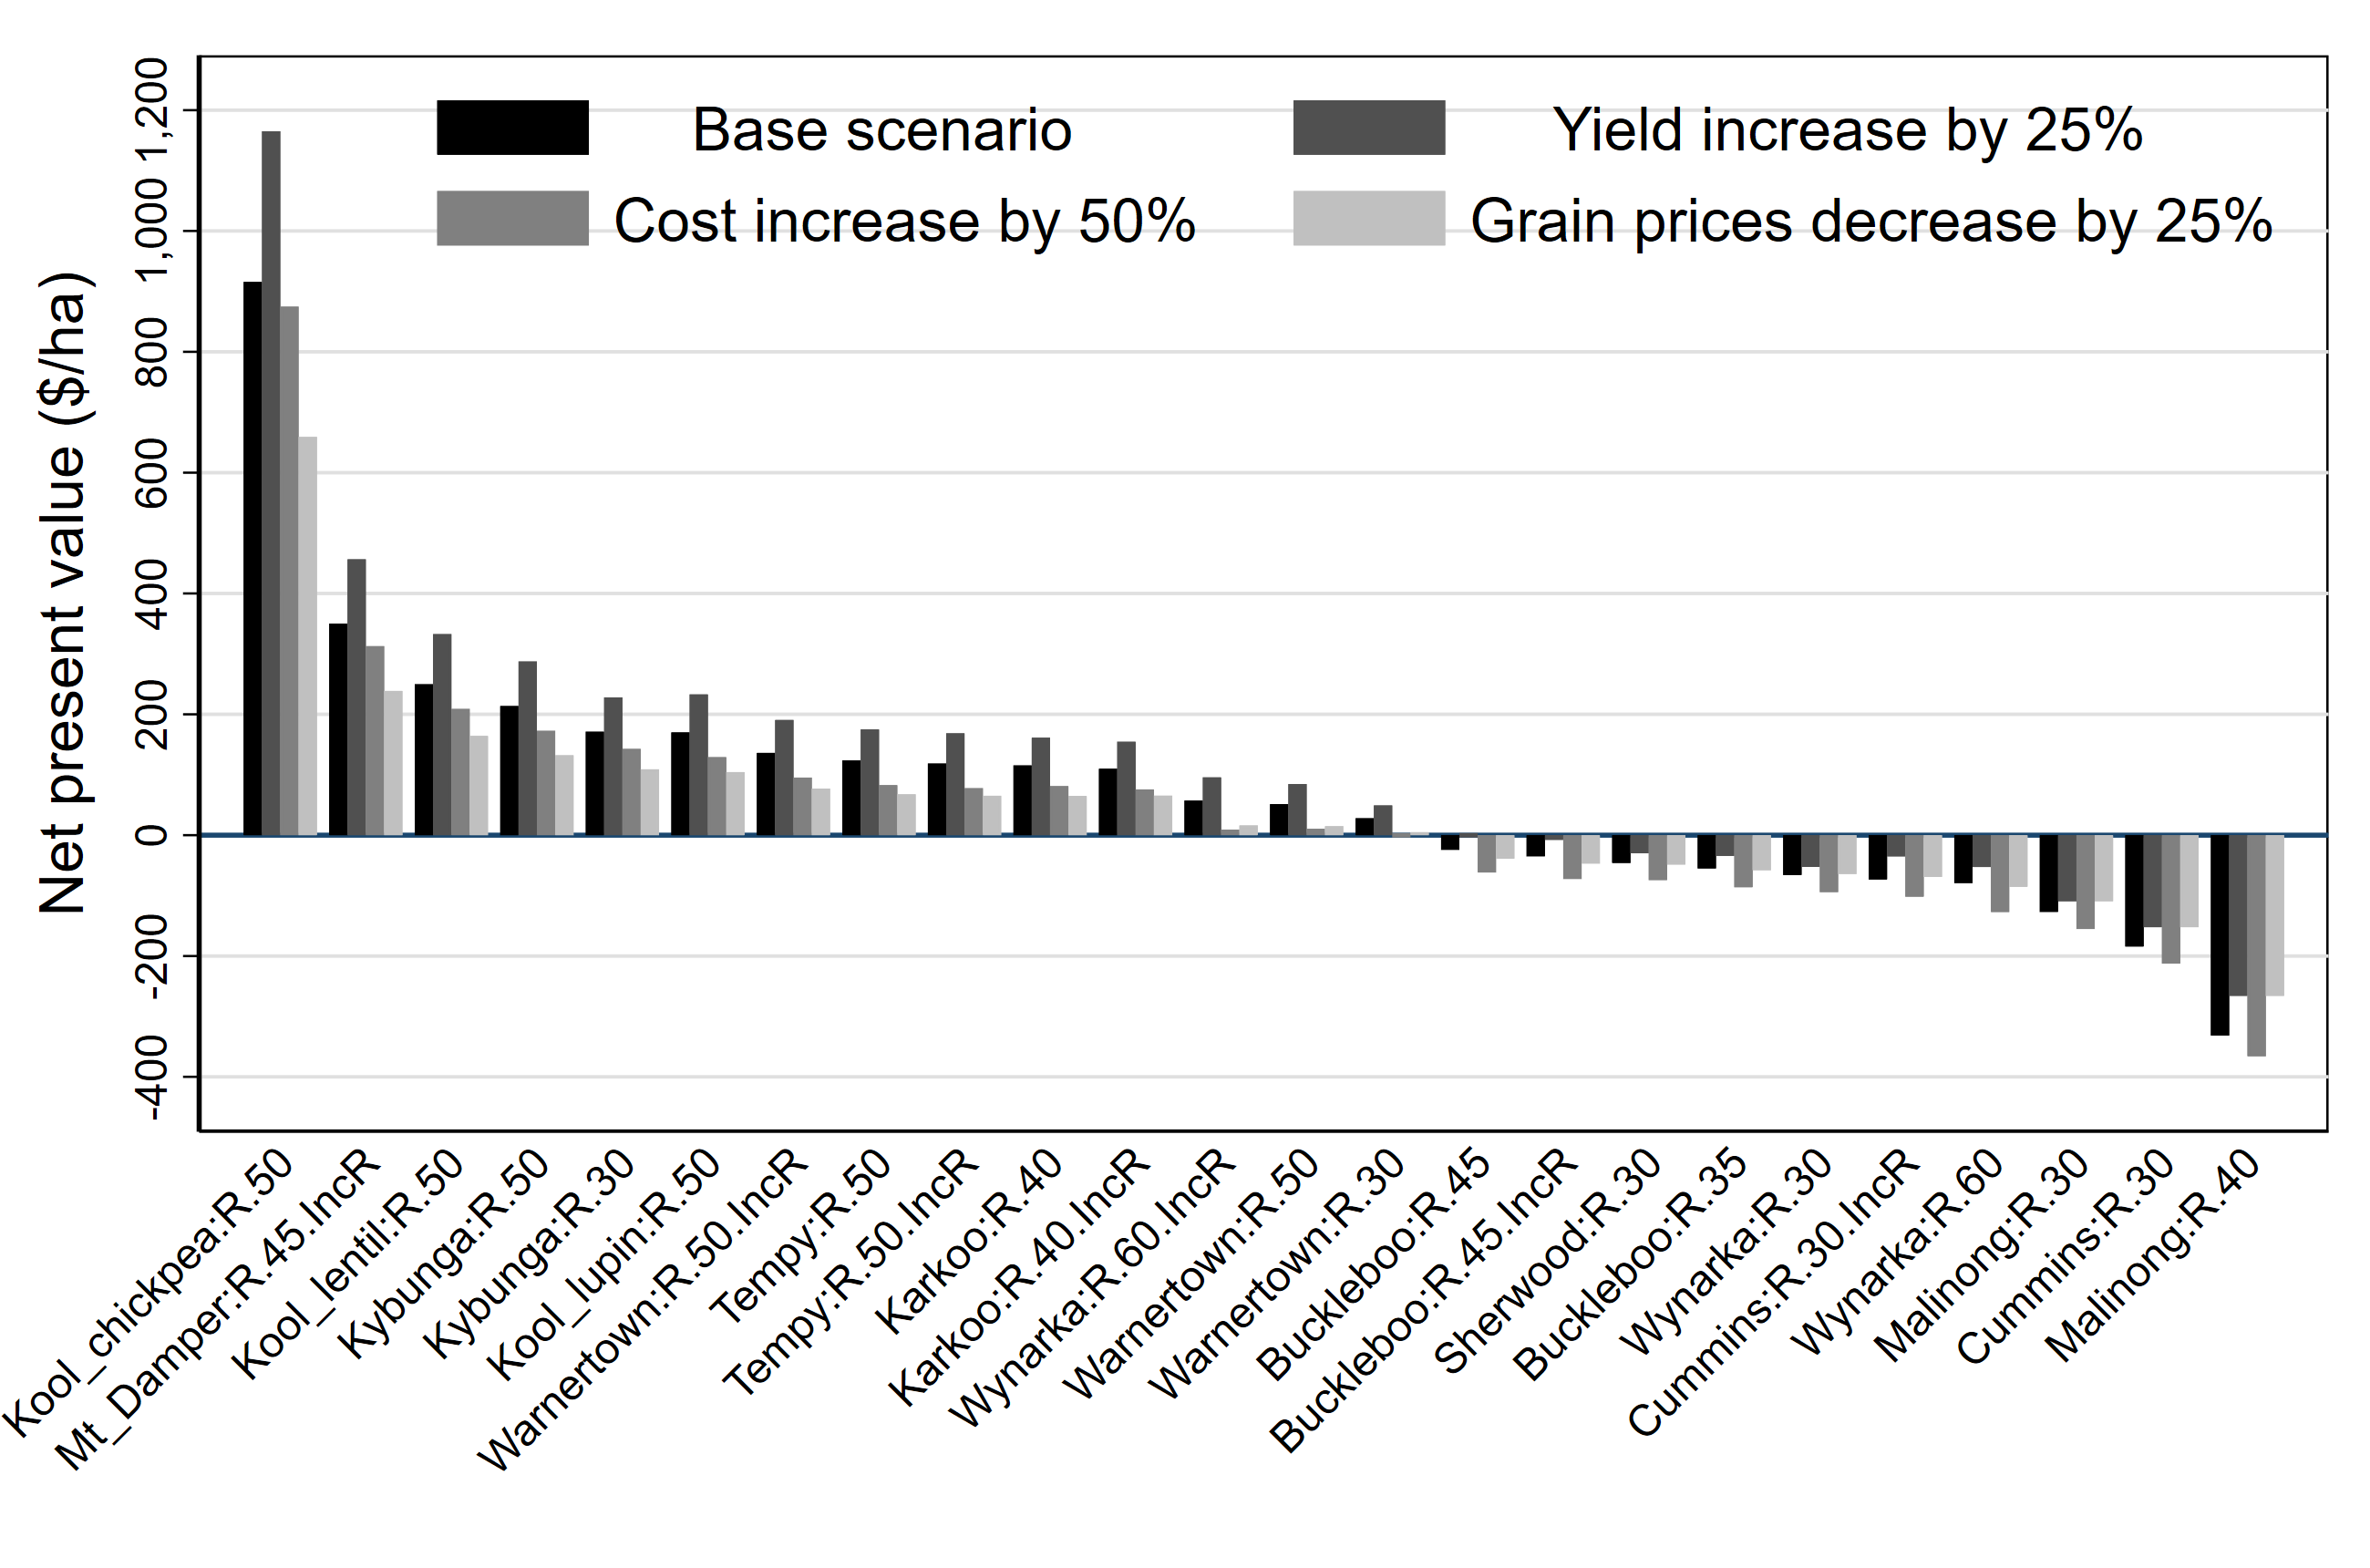 Figure 2. Sensitivity analysis of ripping net present value response base scenario compared with an increase in ripping cost (+50%), a decrease in grain prices (-25%) and an increase in yield response +25%). Each column on the figure represents a site x treatment response value. The baseline scenario has a wheat price of $294/ha (but other crops are represented as per label), ripping costs of $60-105/ha dependent on ripping depth and yield benefits ranging from -0.5-1.0t/ha.